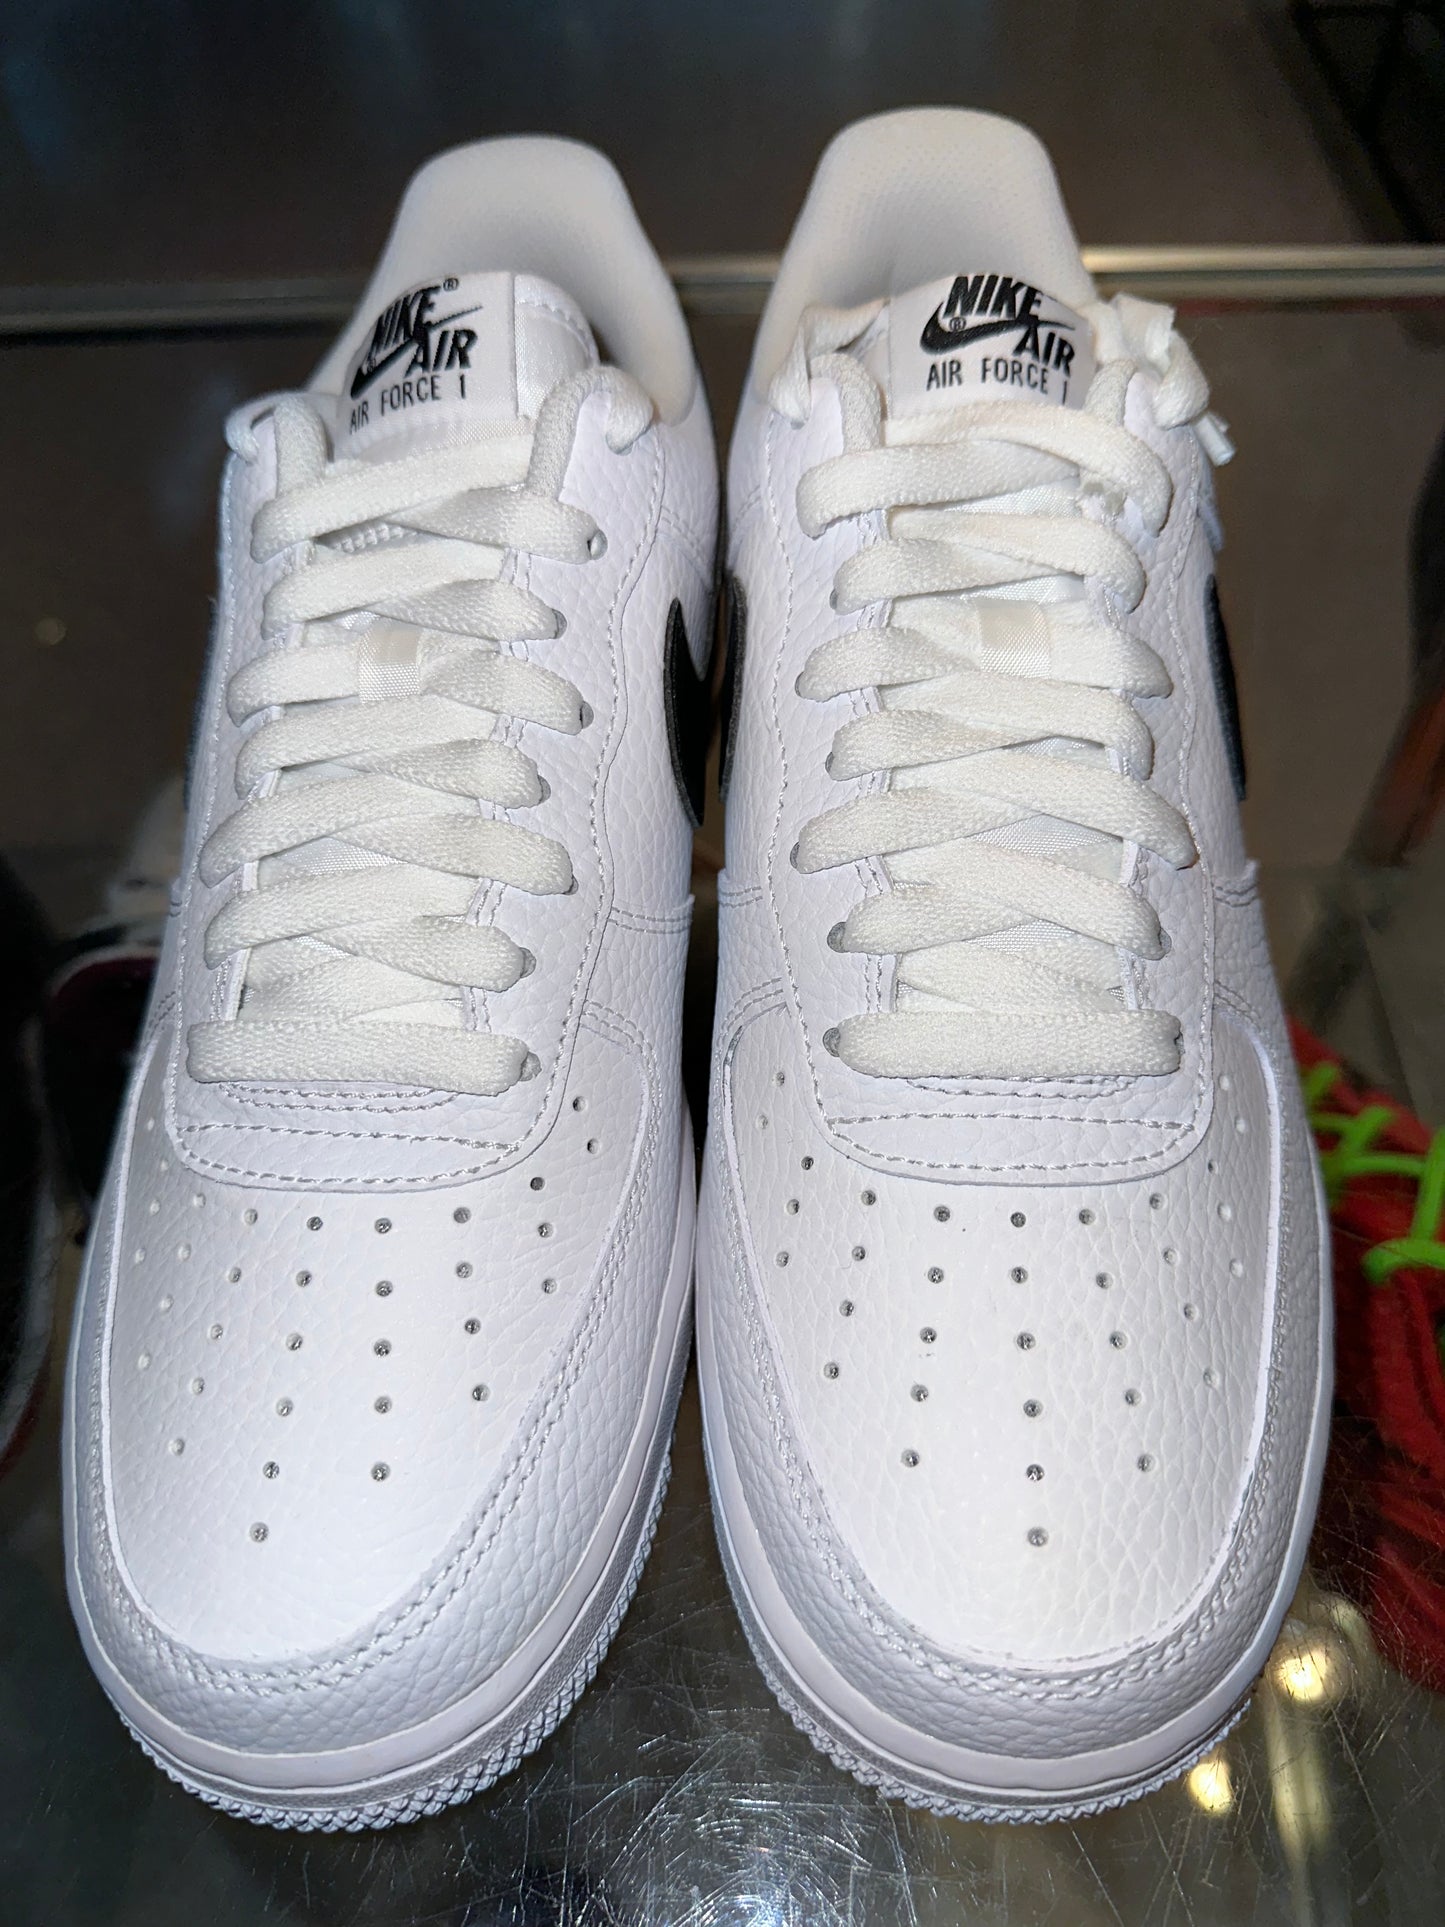 Size 7.5 Air Force 1 Low “Black White” Brand New (Mall)